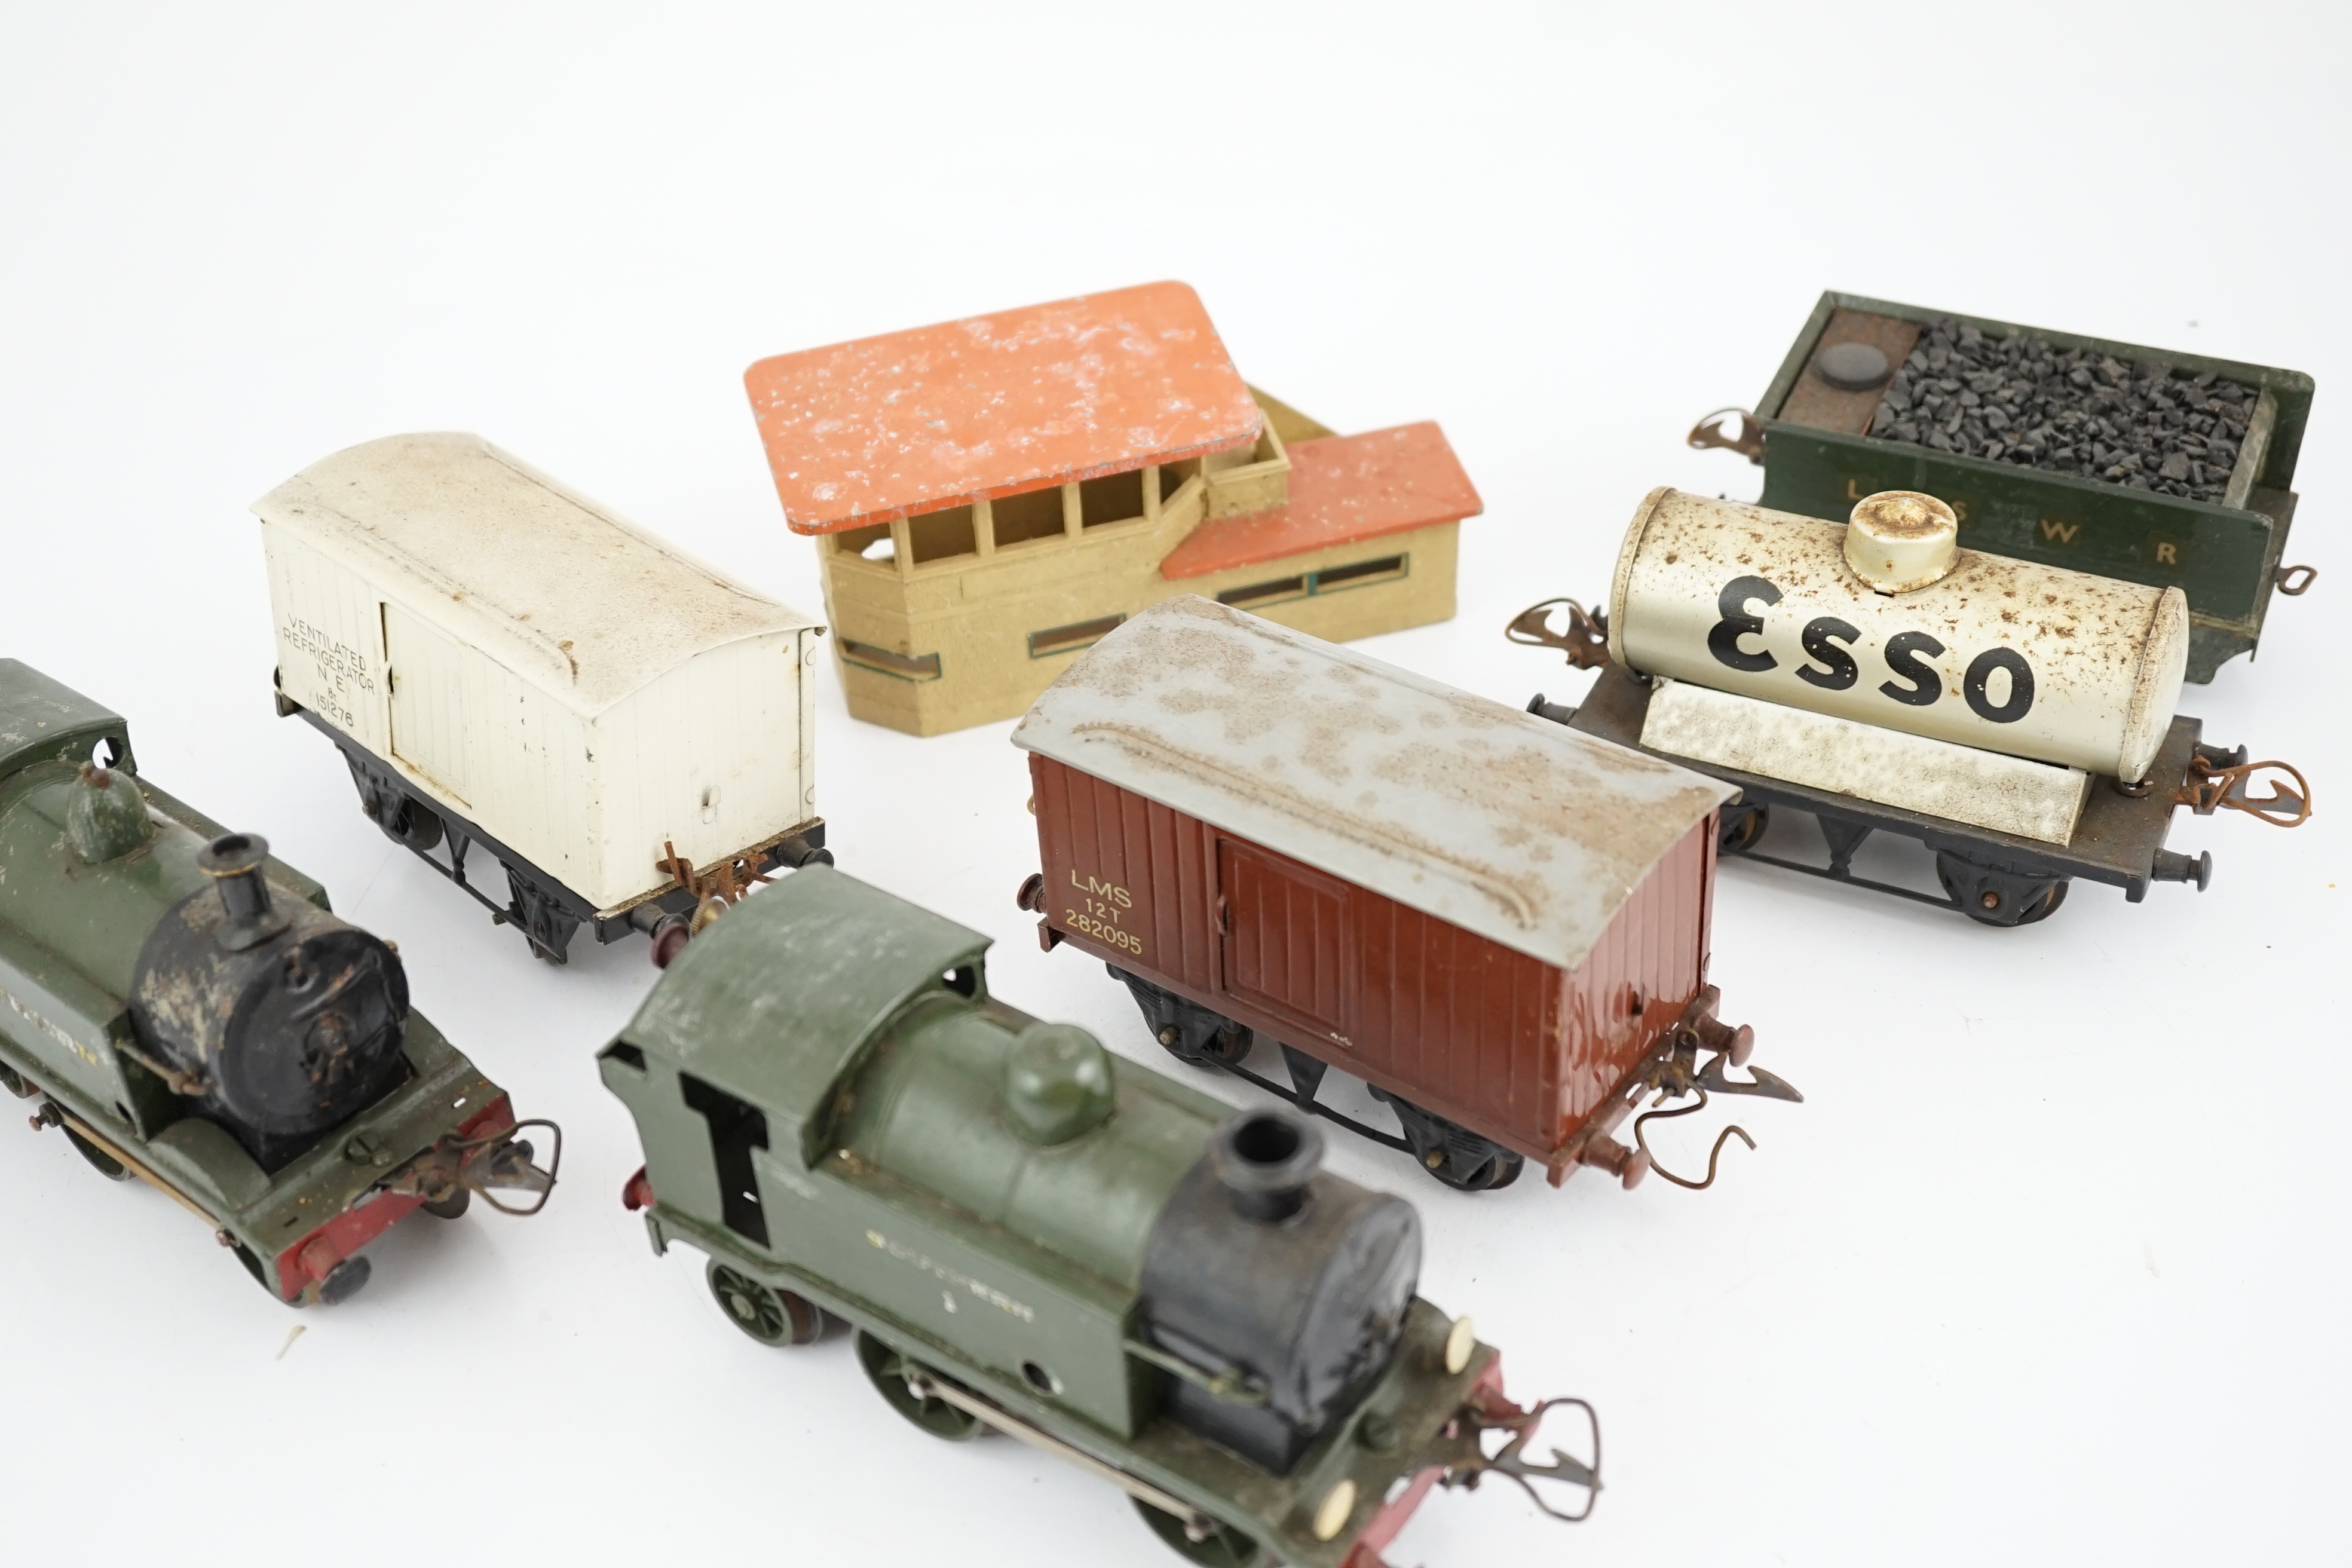 Fourteen 0 gauge tinplate etc. railway items, including three clockwork locomotives; an LSWR 4-4-0 tender loco, an SR 0-4-4T loco and an SR 0-4-2T loco, together with nine Hornby freight wagons, a Bing milk traffic van a